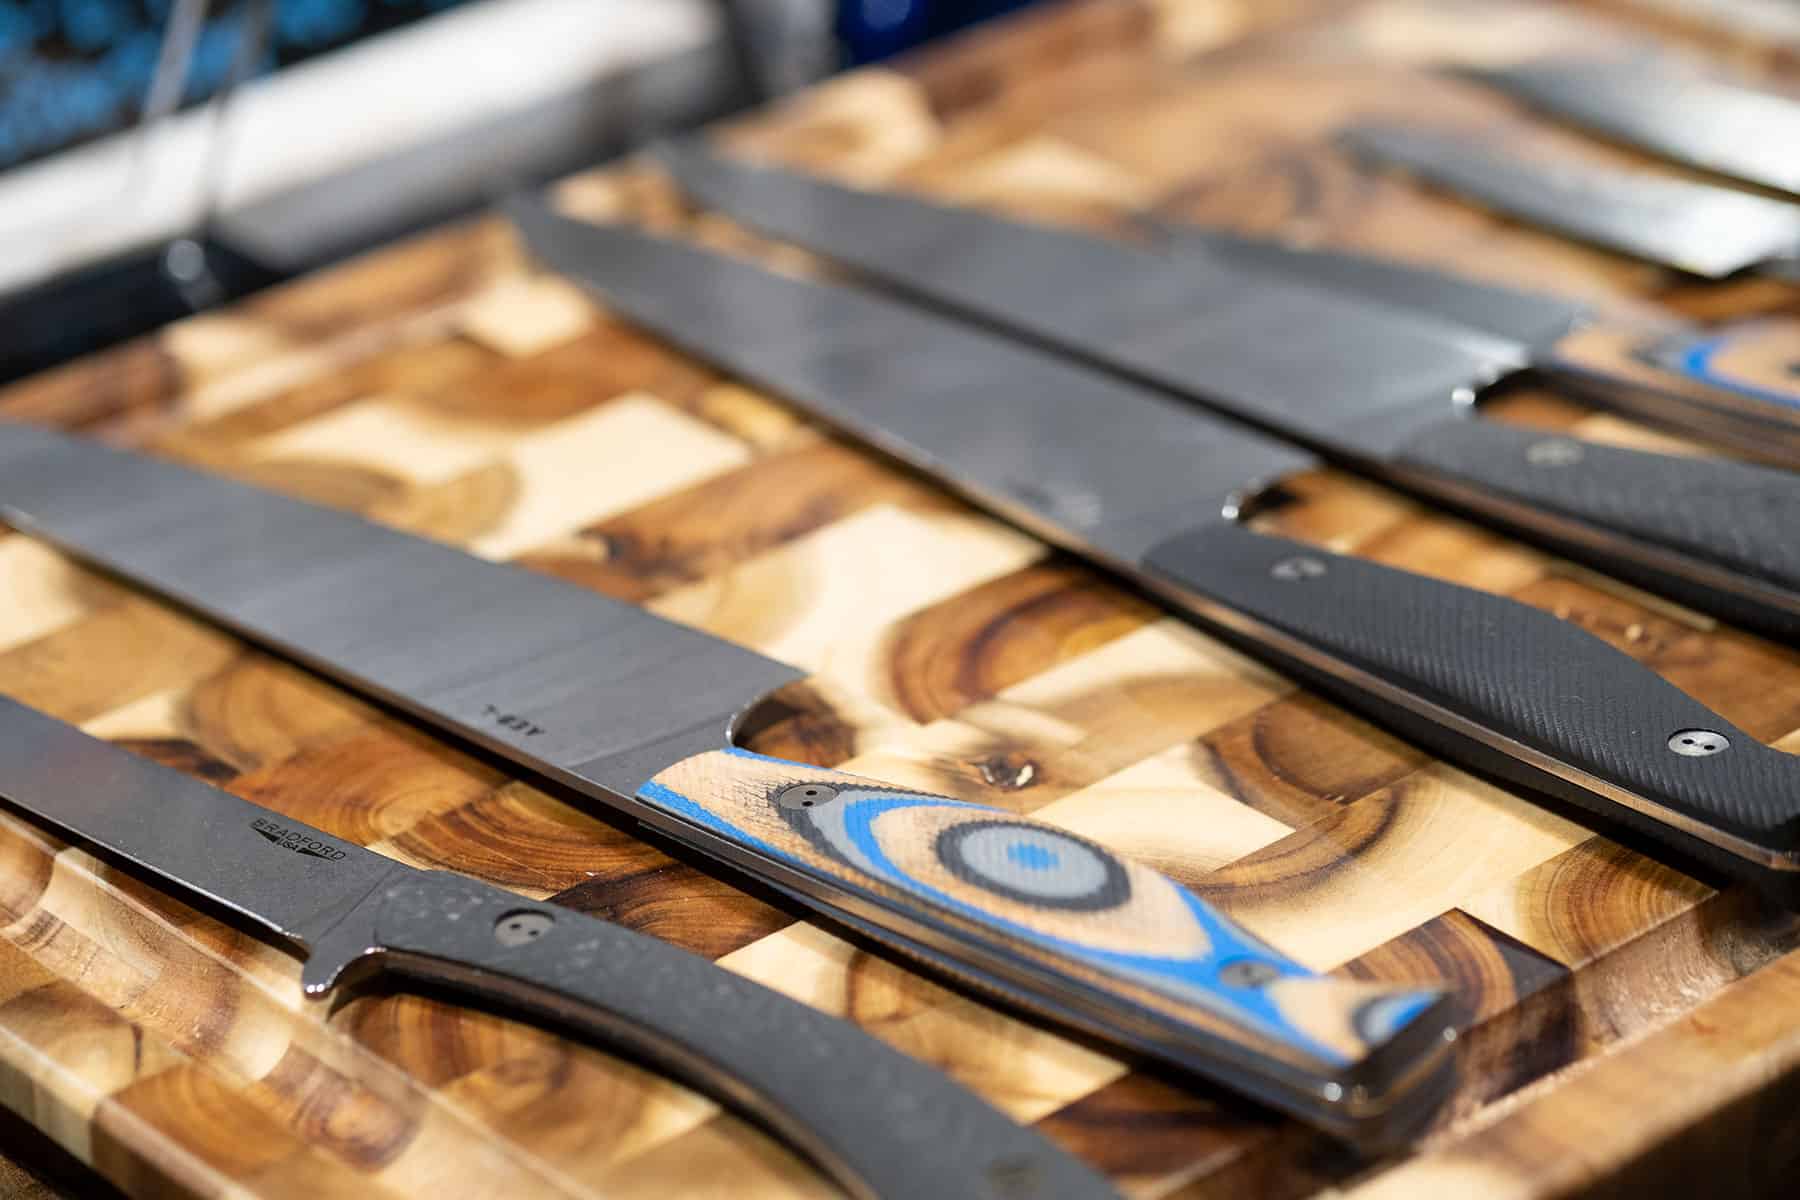 Braford Knives showed up to Blade Show West with an impressive line-up of kitchen knives.